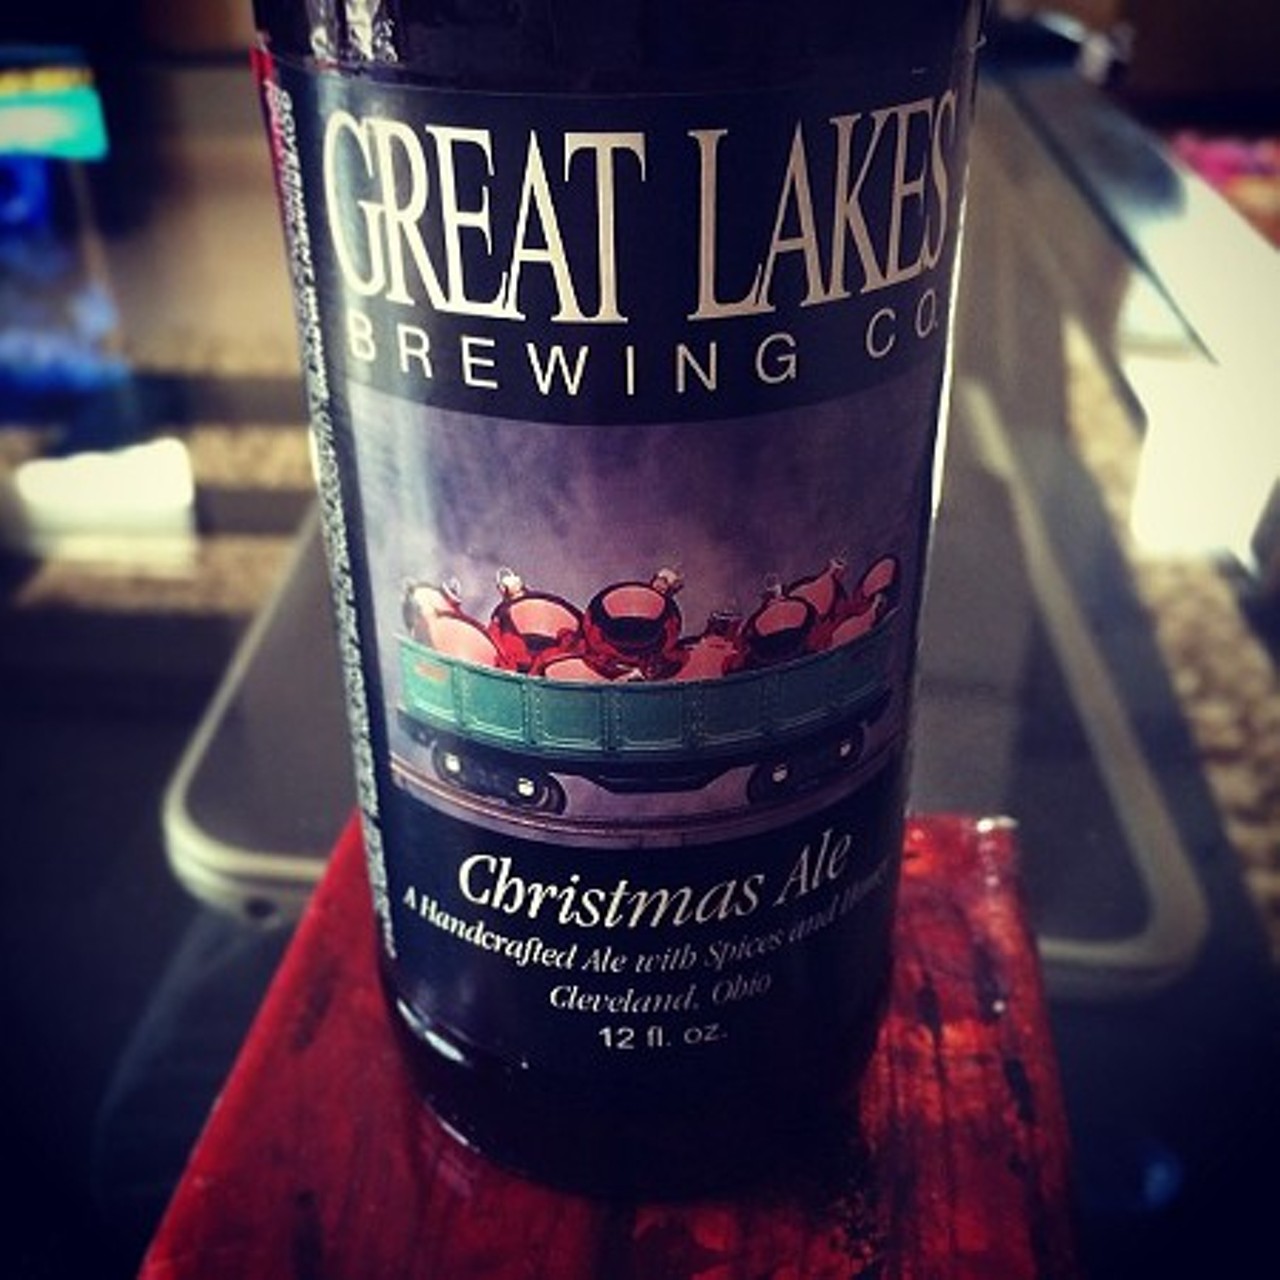 Around the Corner - Becoming a local fish legend, Around the Corner has a secret weapon in their fish fry: Great Lakes Christmas Ale. That's right. The folks at ATC use the coveted holiday beer in their savory batter that coats the hearty cod fish. Just down right awesome.  Give it at try at 18616 Detroit Ave.